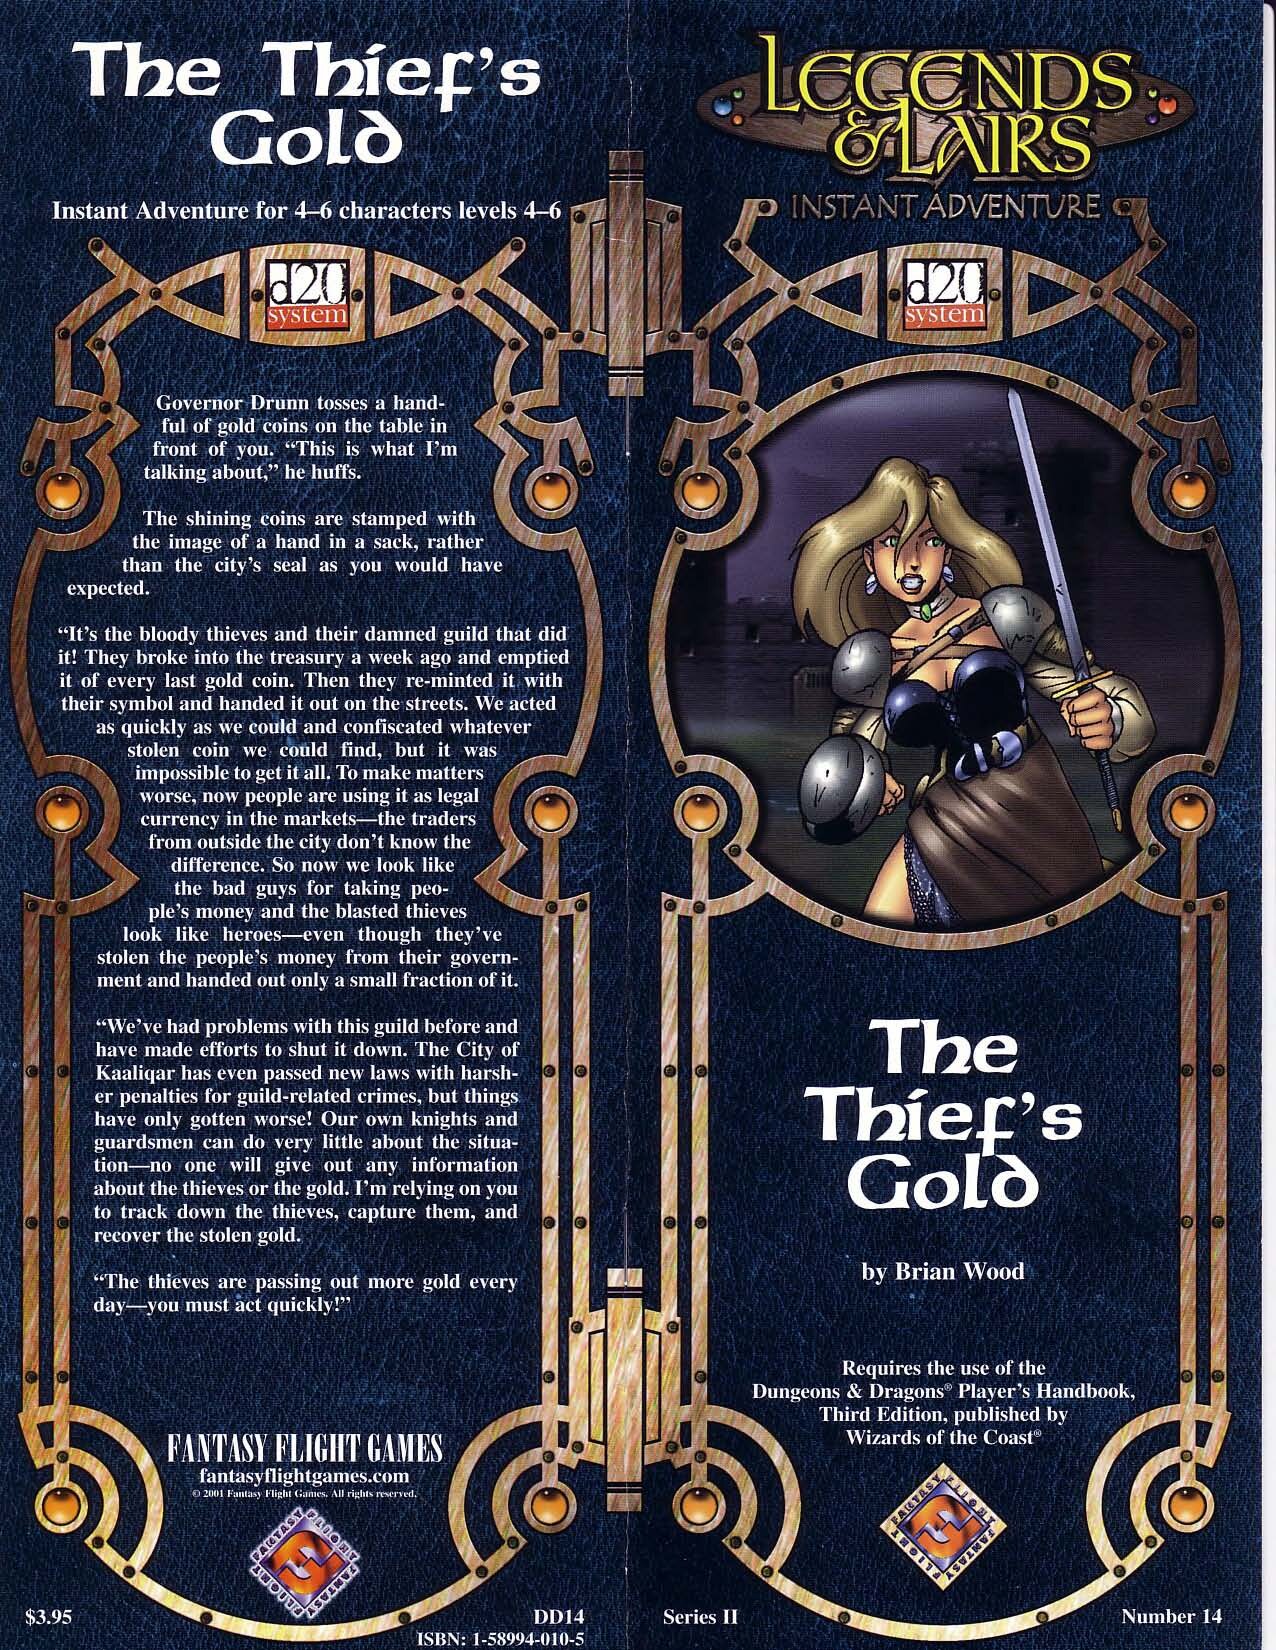 The Thief's Gold